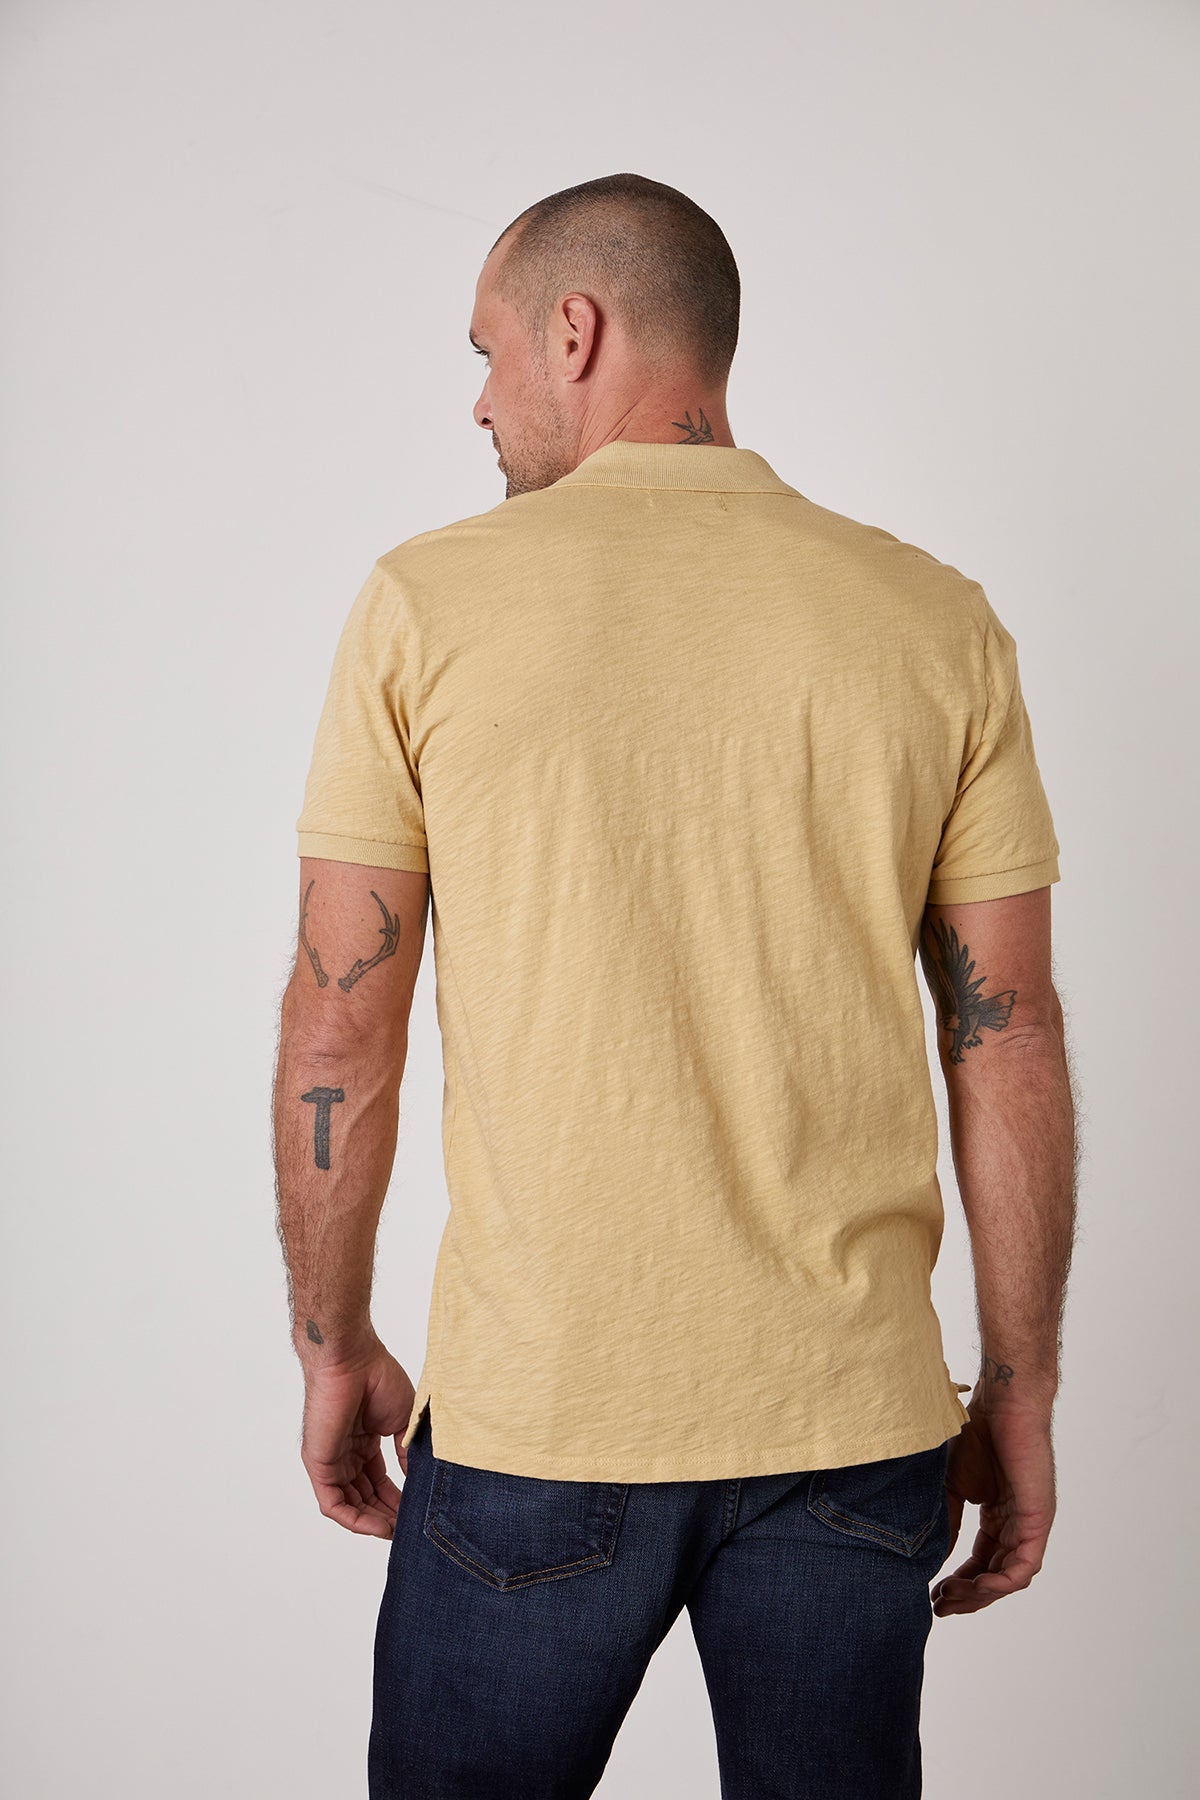 The back of a man wearing a NIKO POLO silhouette in a yellow cotton slub t-shirt by Velvet by Graham & Spencer with a vintage-feel hand.-25793857945793